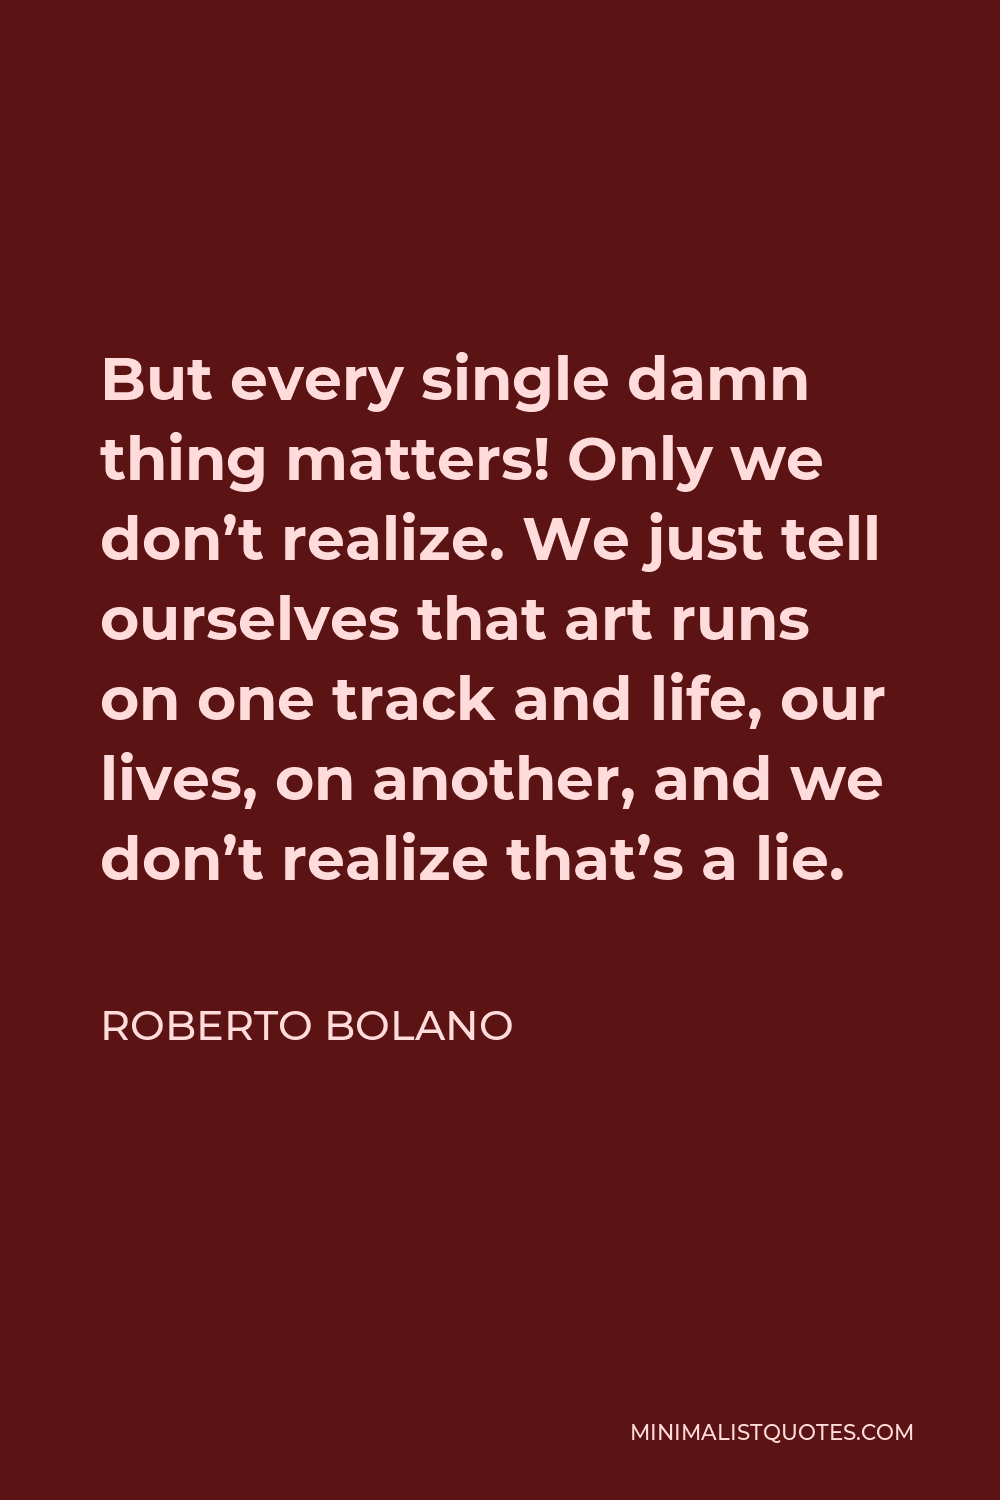 Roberto Bolano Quote - But every single damn thing matters! Only we don’t realize. We just tell ourselves that art runs on one track and life, our lives, on another, and we don’t realize that’s a lie.